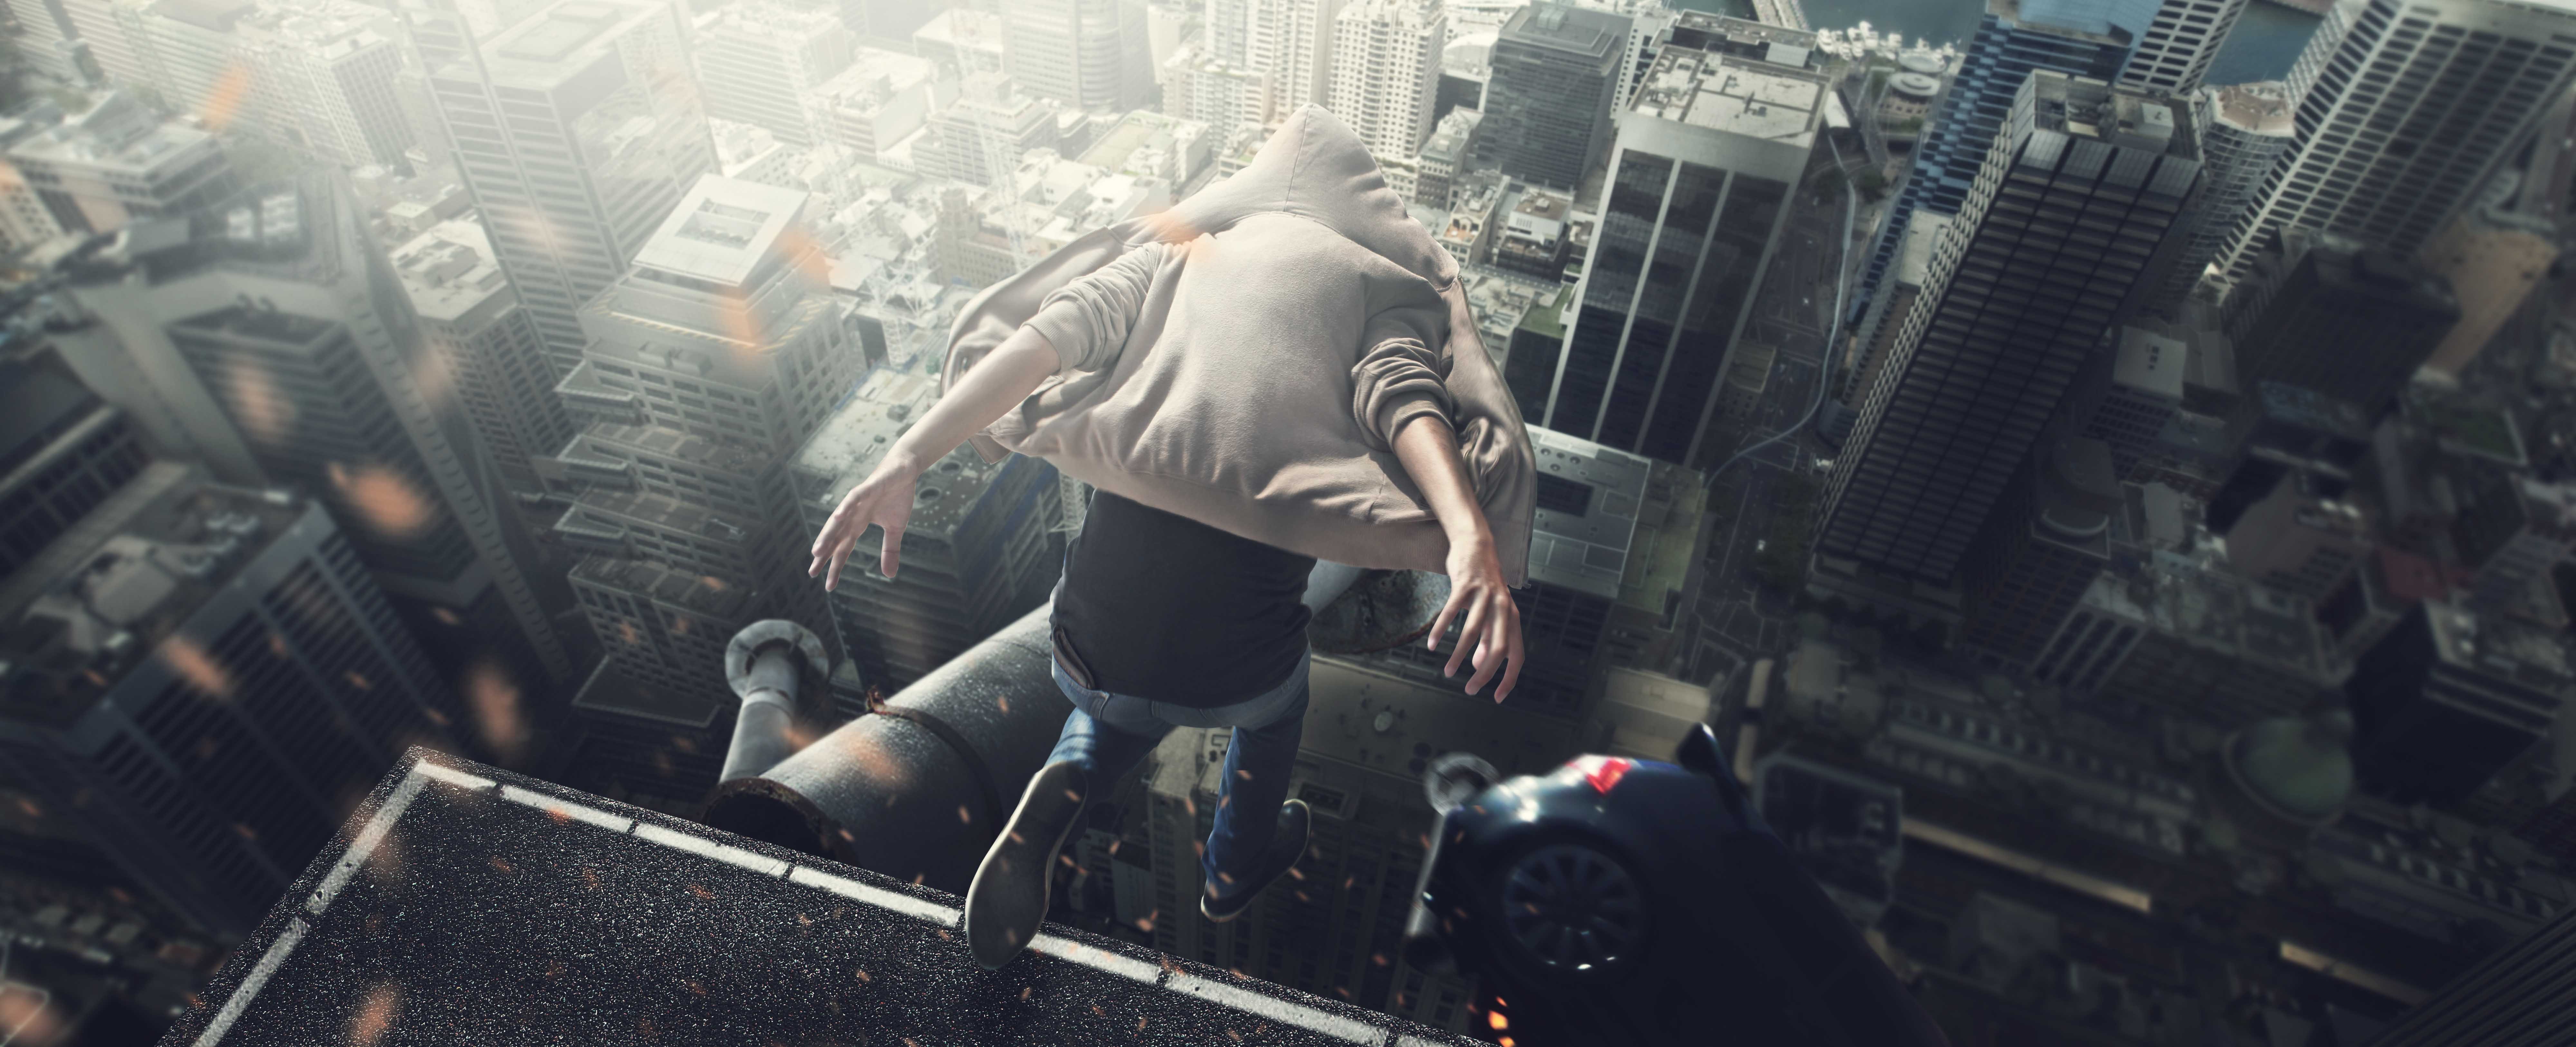 building, Falling, Cityscape, Jumping Wallpaper